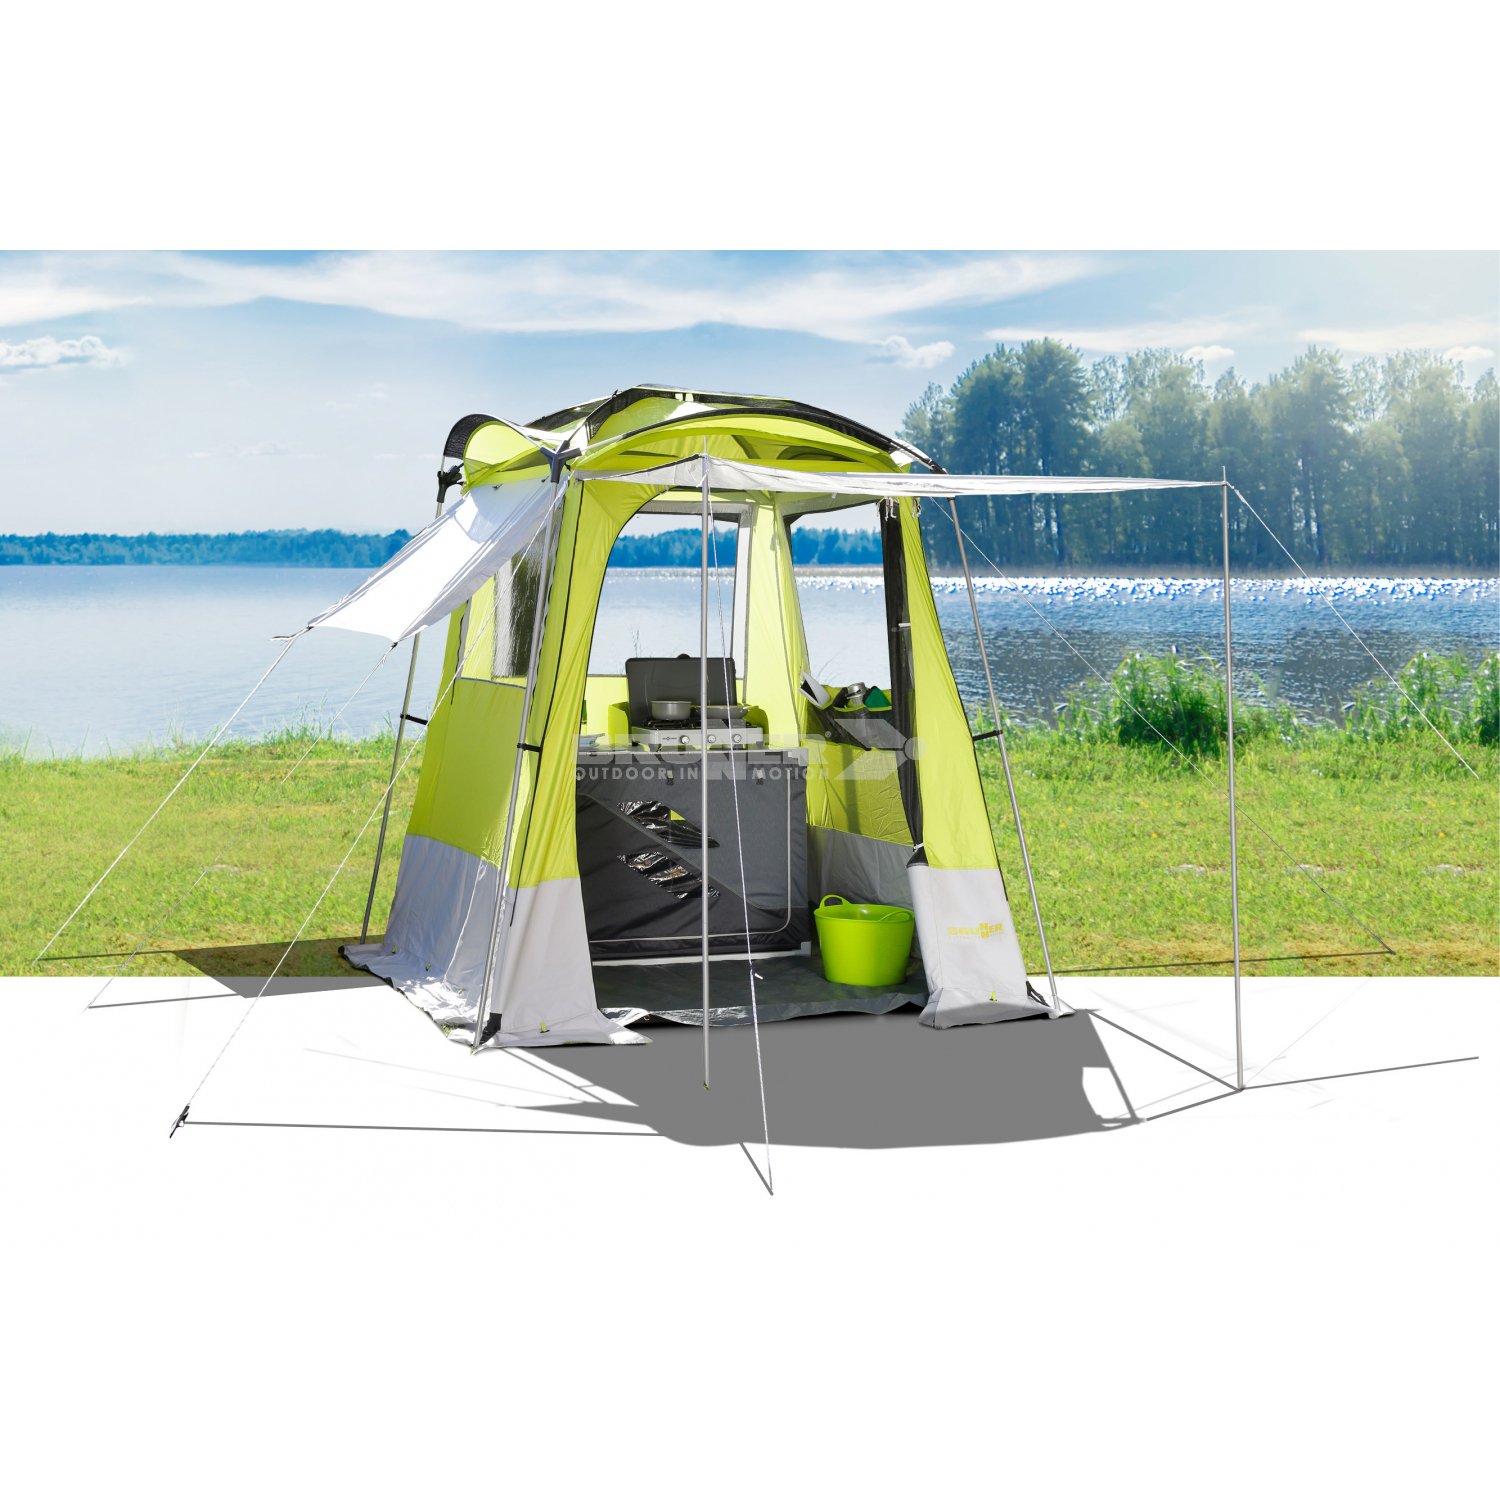 Gusto NG II Brunner Tente cuisine 200x150 pour le camping